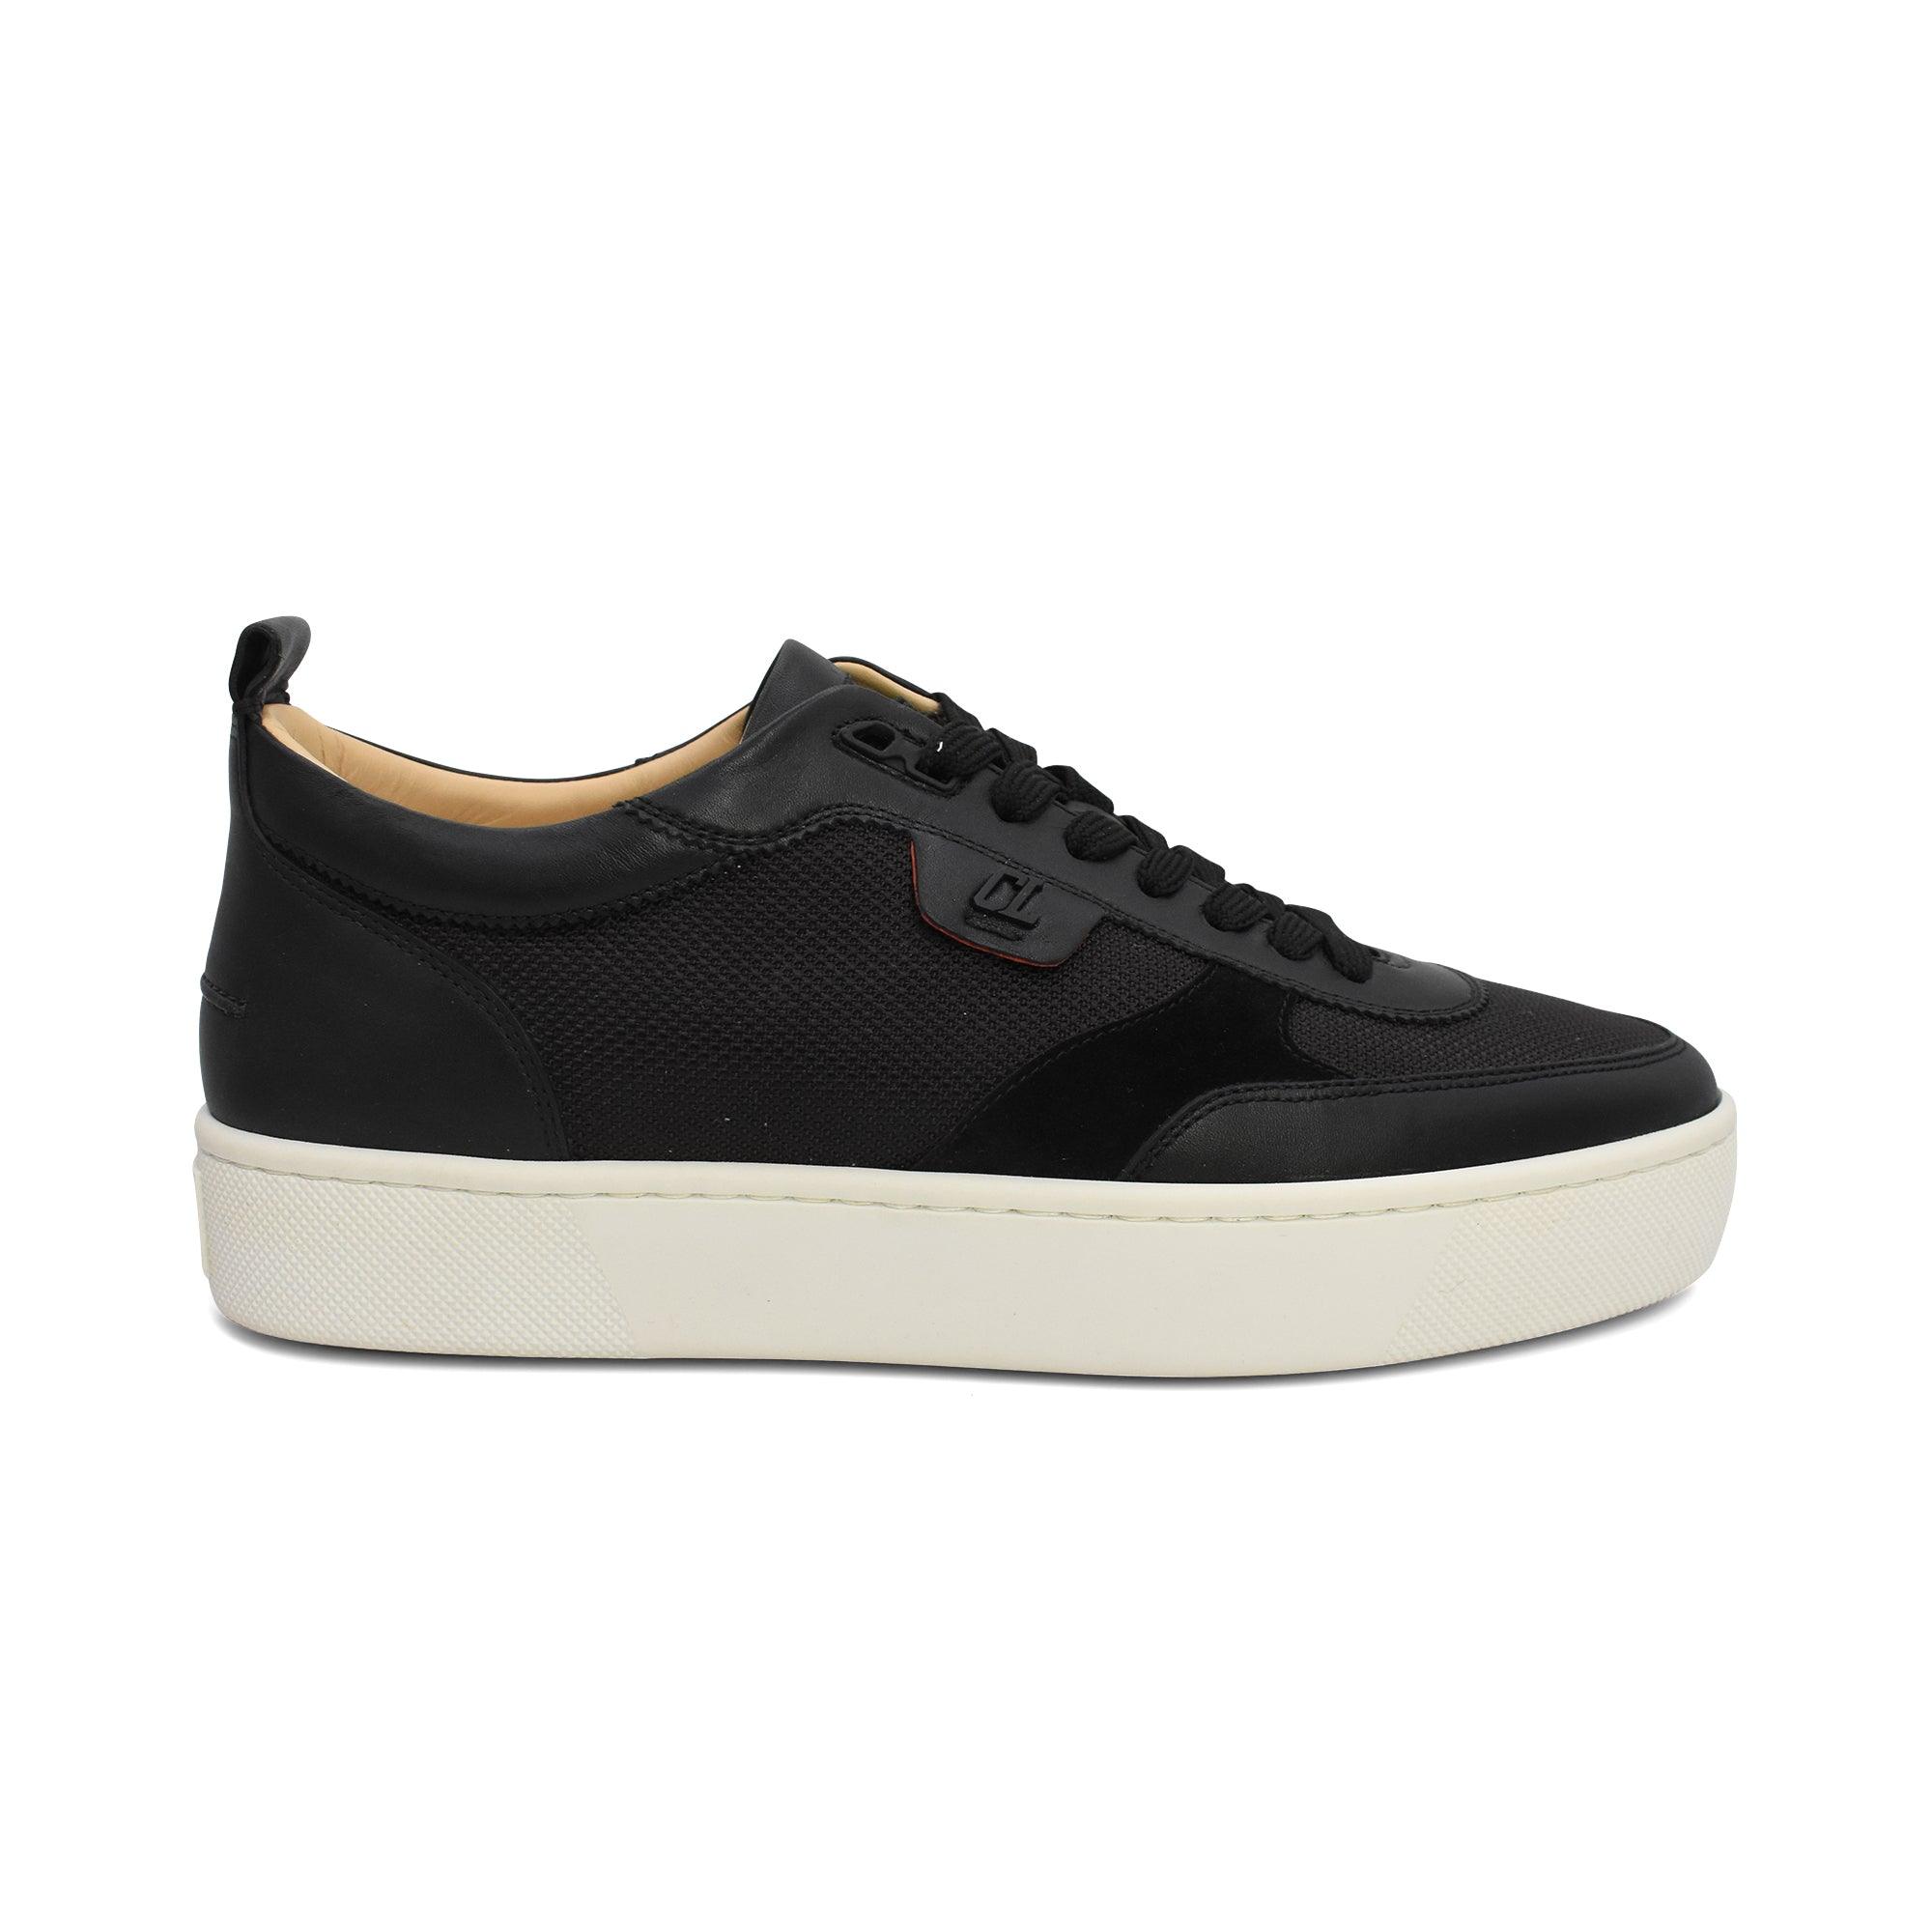 Christian Louboutin Sneakers - Men's 42.5 - Fashionably Yours